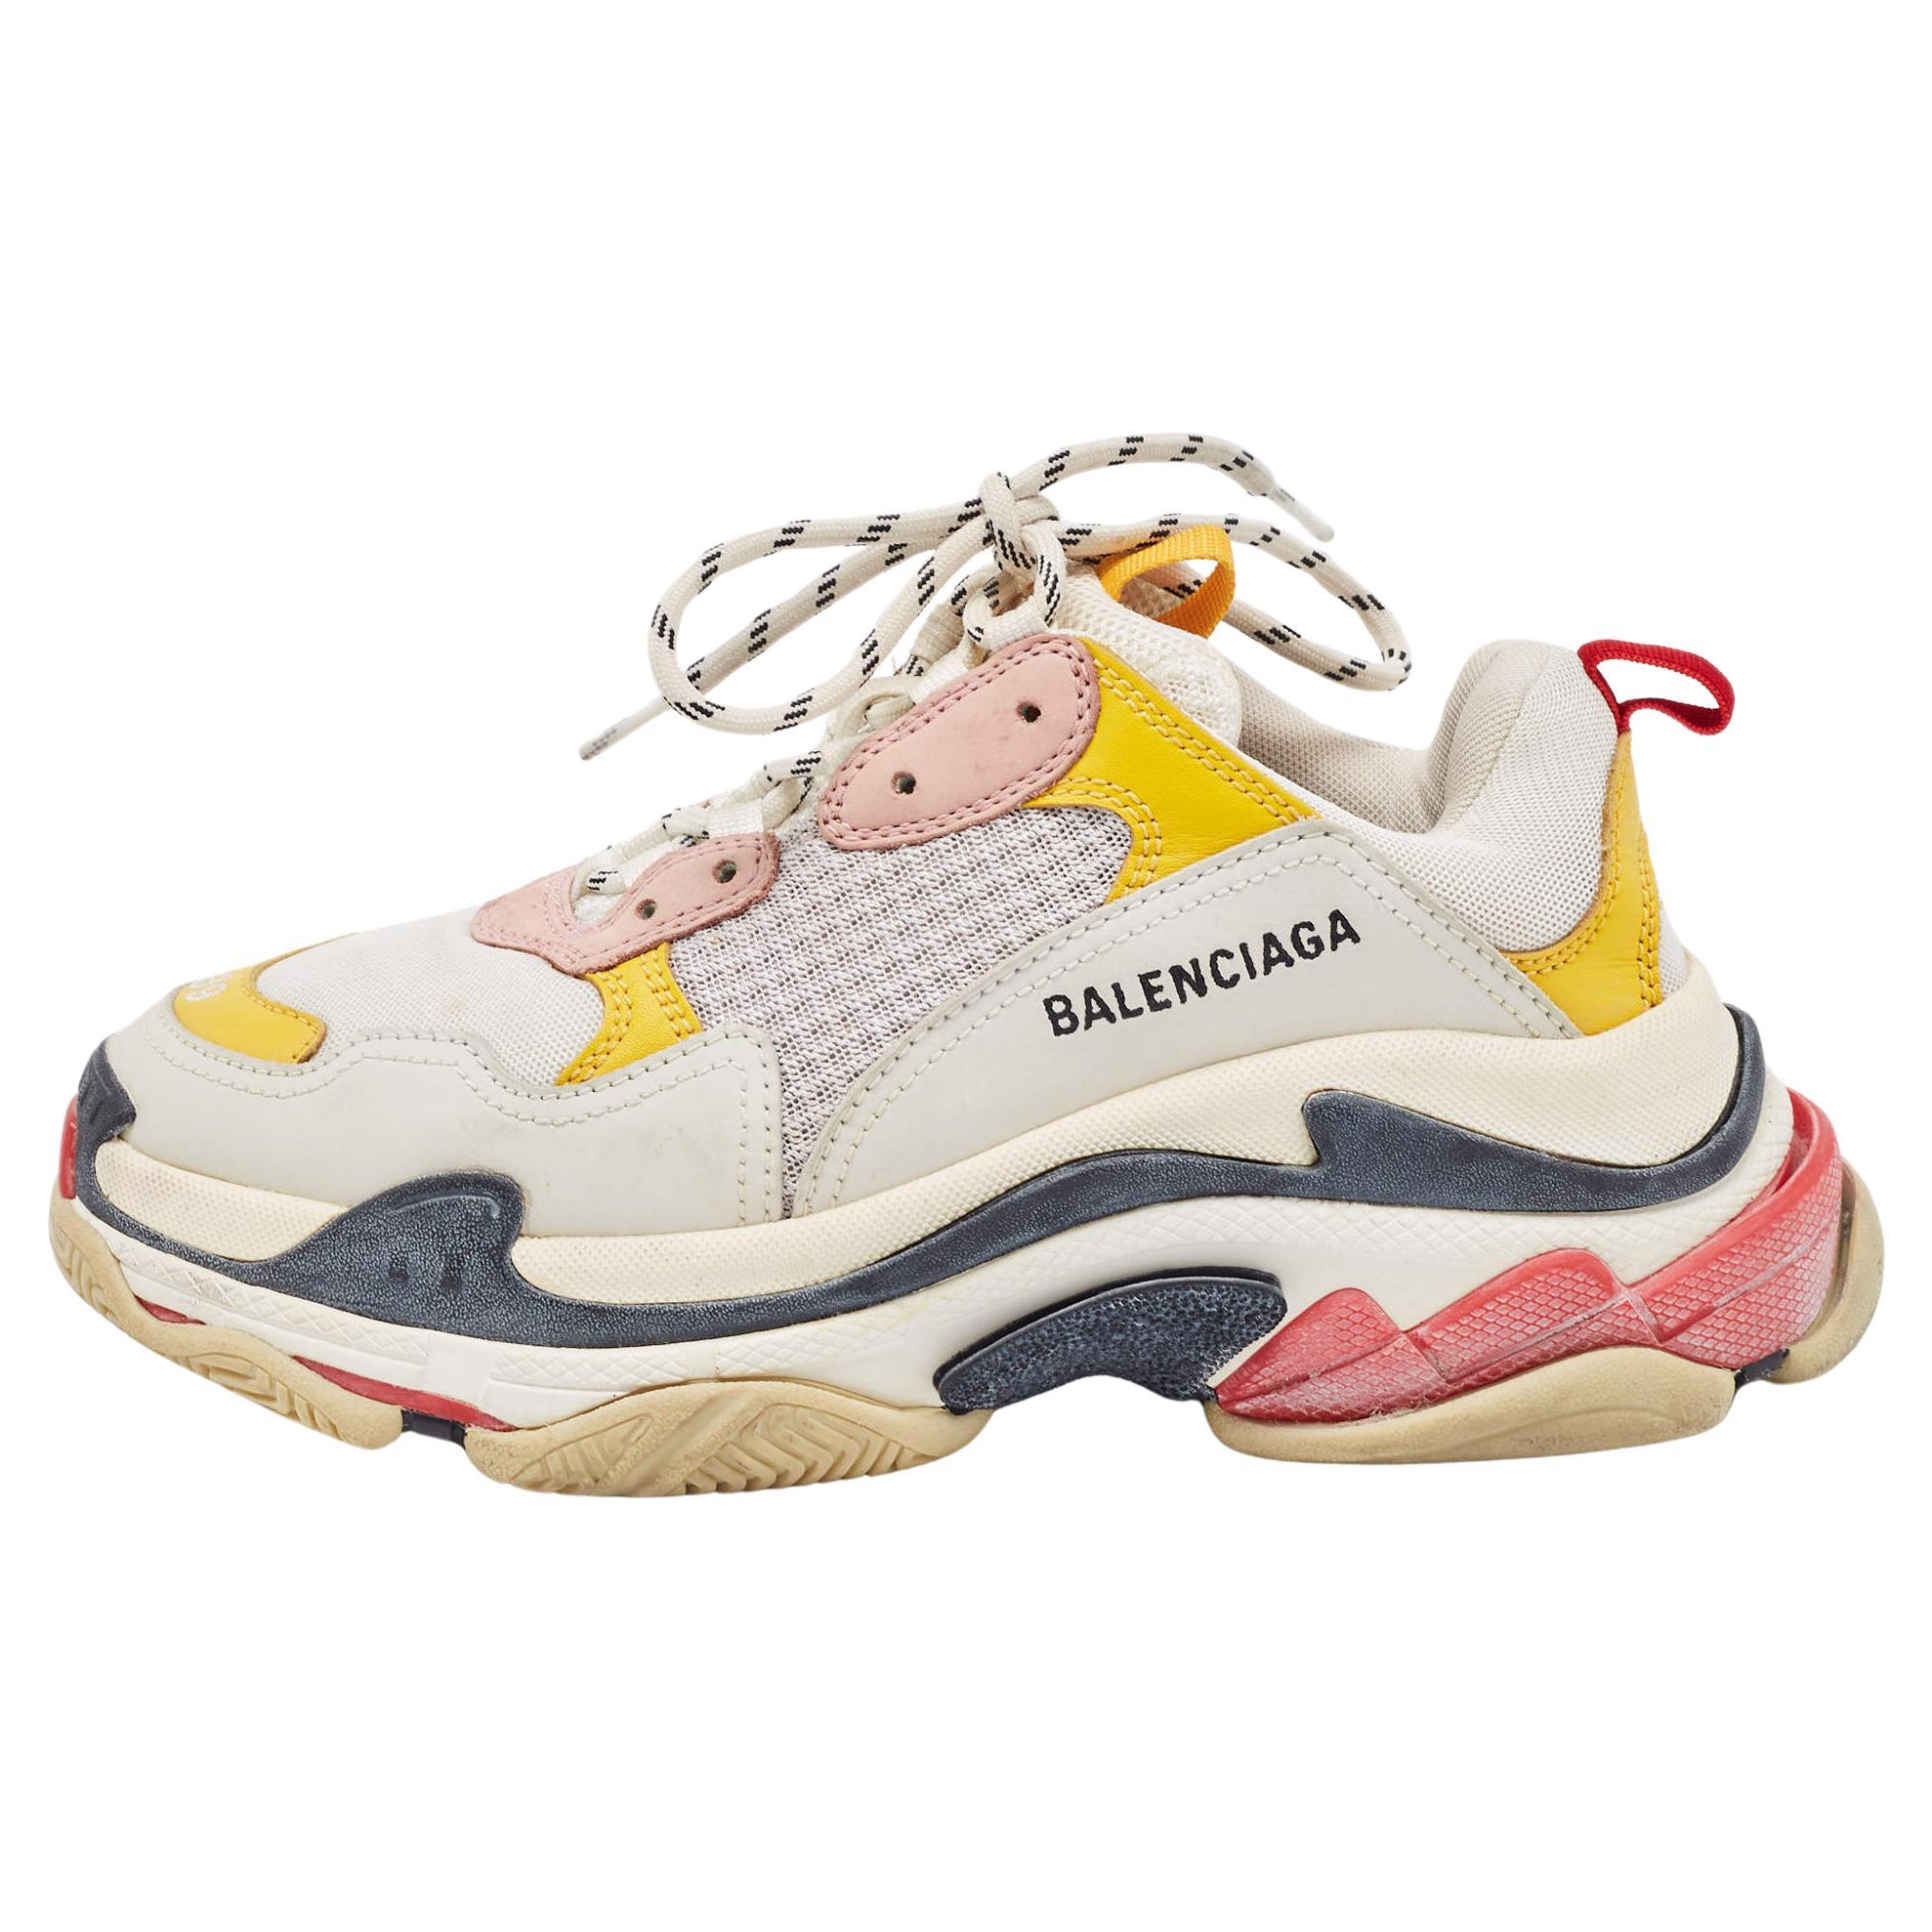 Balenciaga Multicolor Mesh and Leather Triple S Sneakers Size 39 For Sale